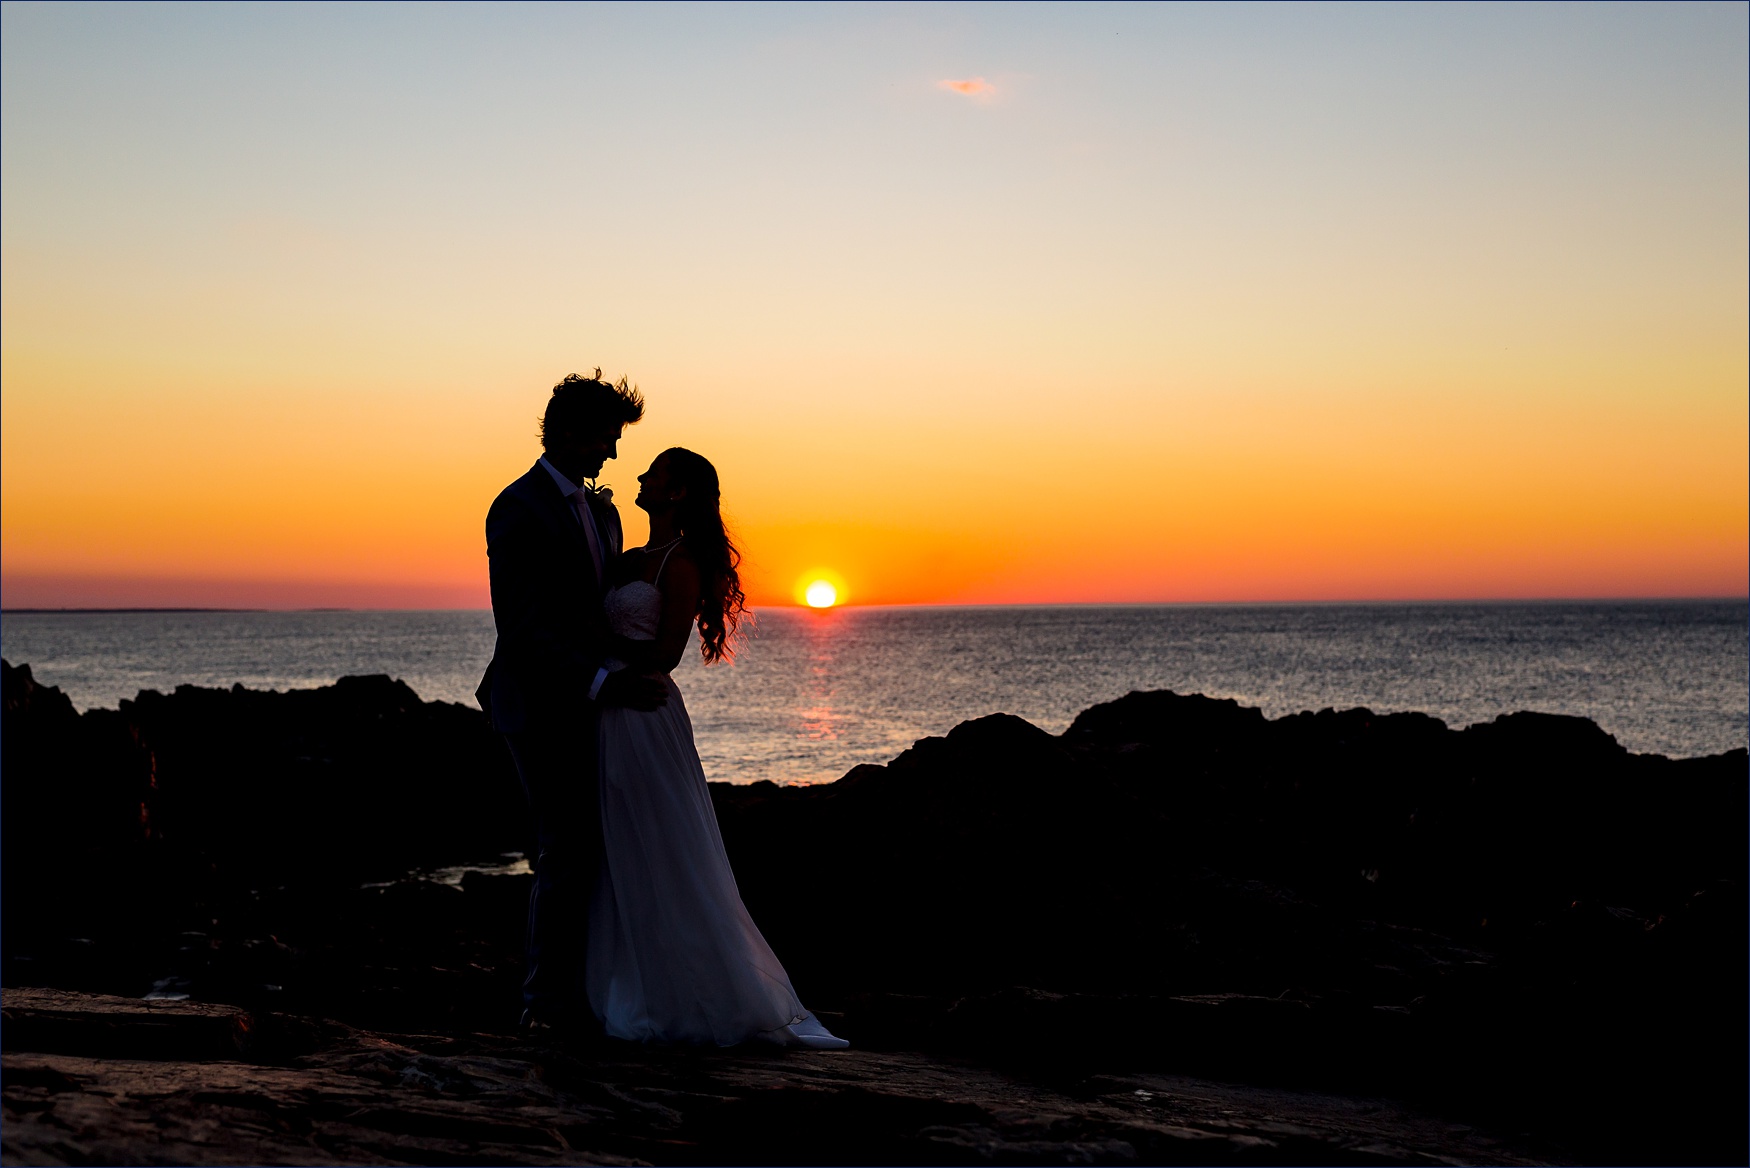 The bride and groom stand in front of the sunrise while out on the Marginal Way rocks after eloping